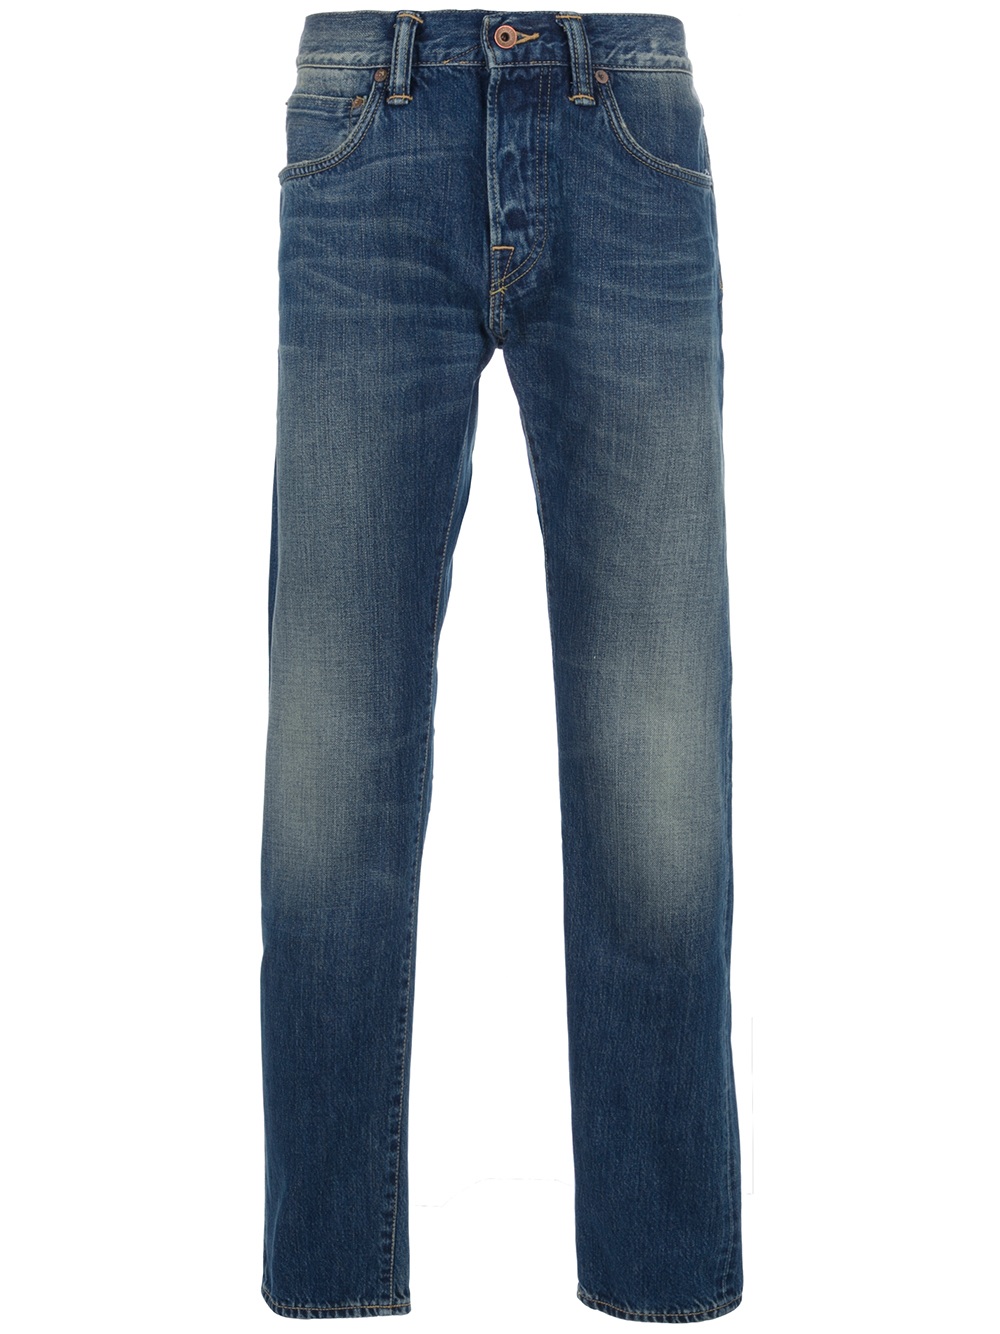 Edwin Ed55 Rainbow Selvage Jeans in Blue for Men - Lyst